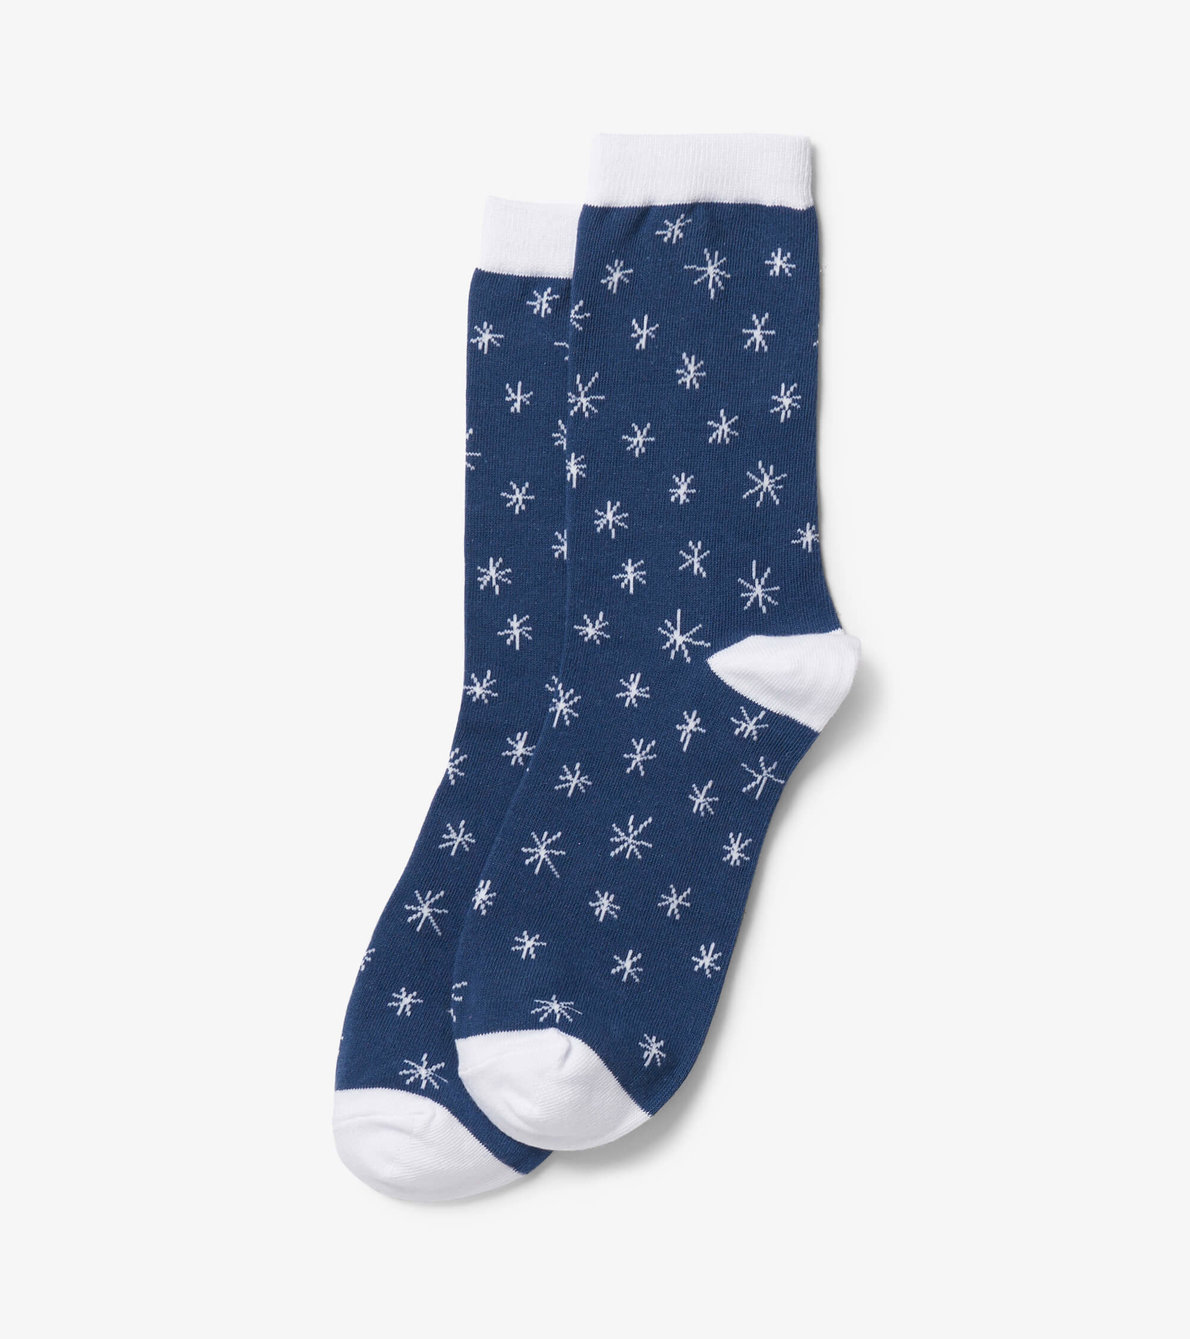 View larger image of Falling Snowflakes Women's Crew Socks